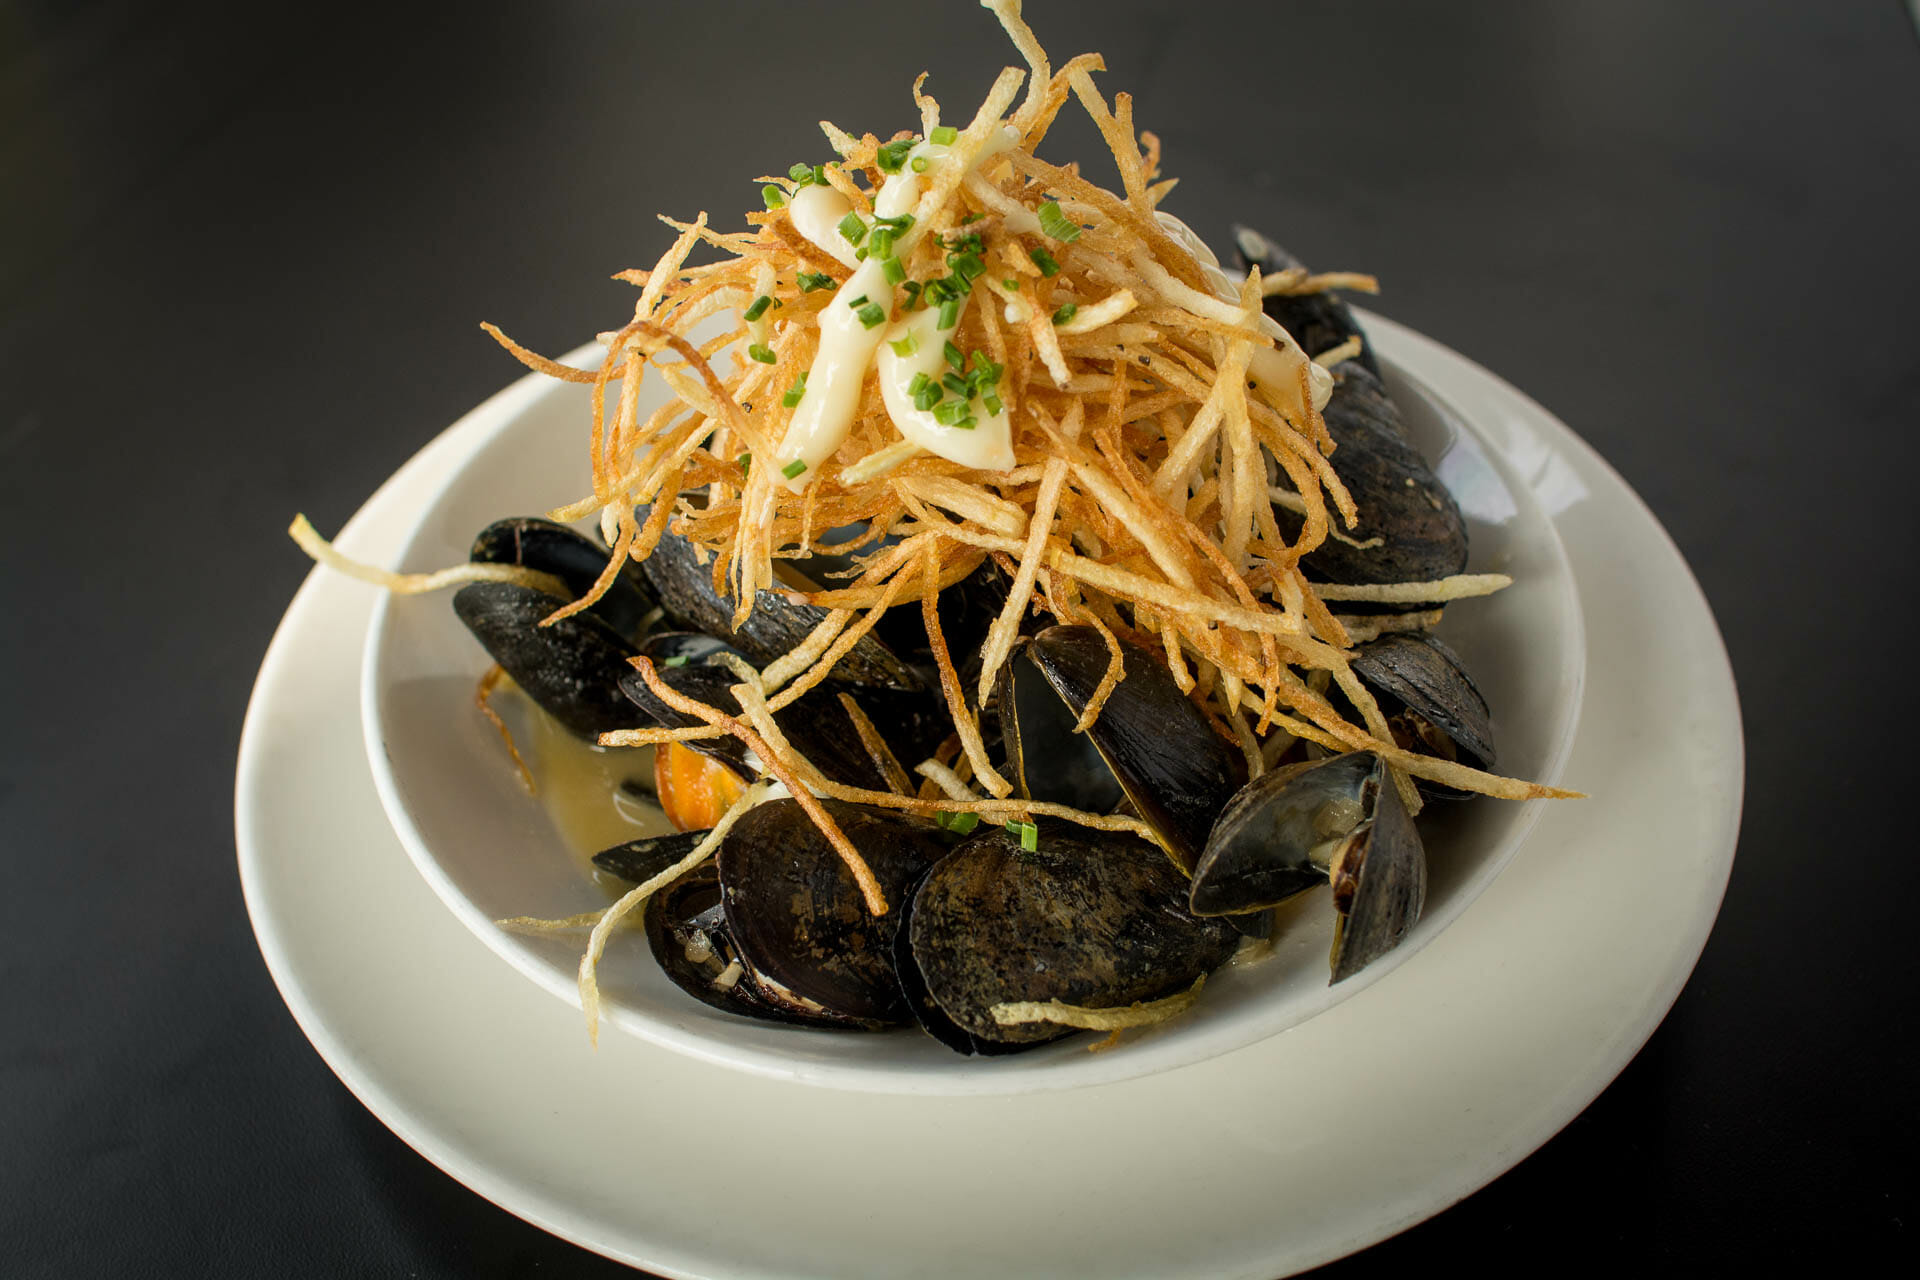 Chimay Steamed Mussels with Pommes Frites and Garlic Aioli